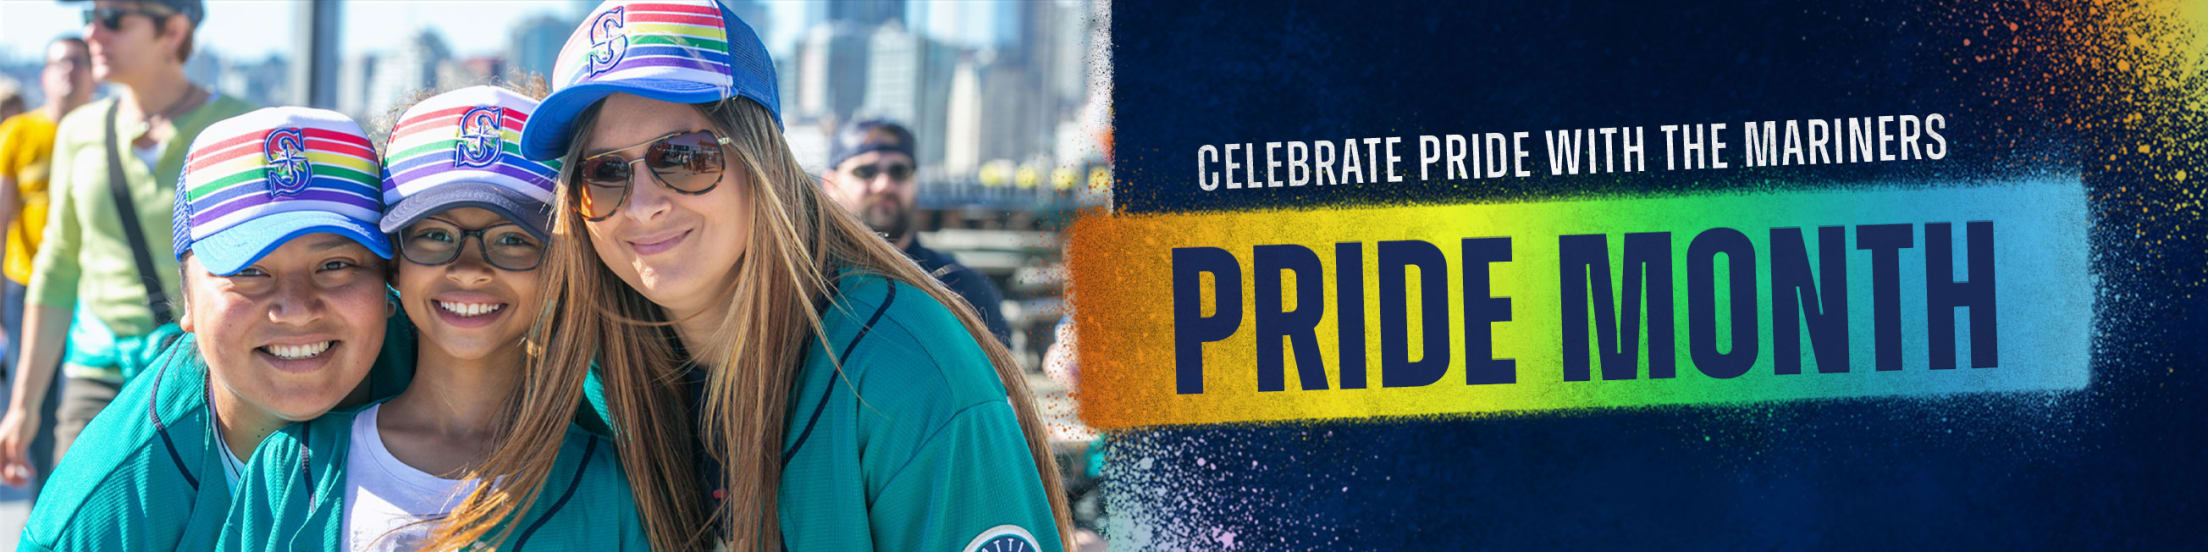 Celebrating Pride With The Mariners Seattle Mariners